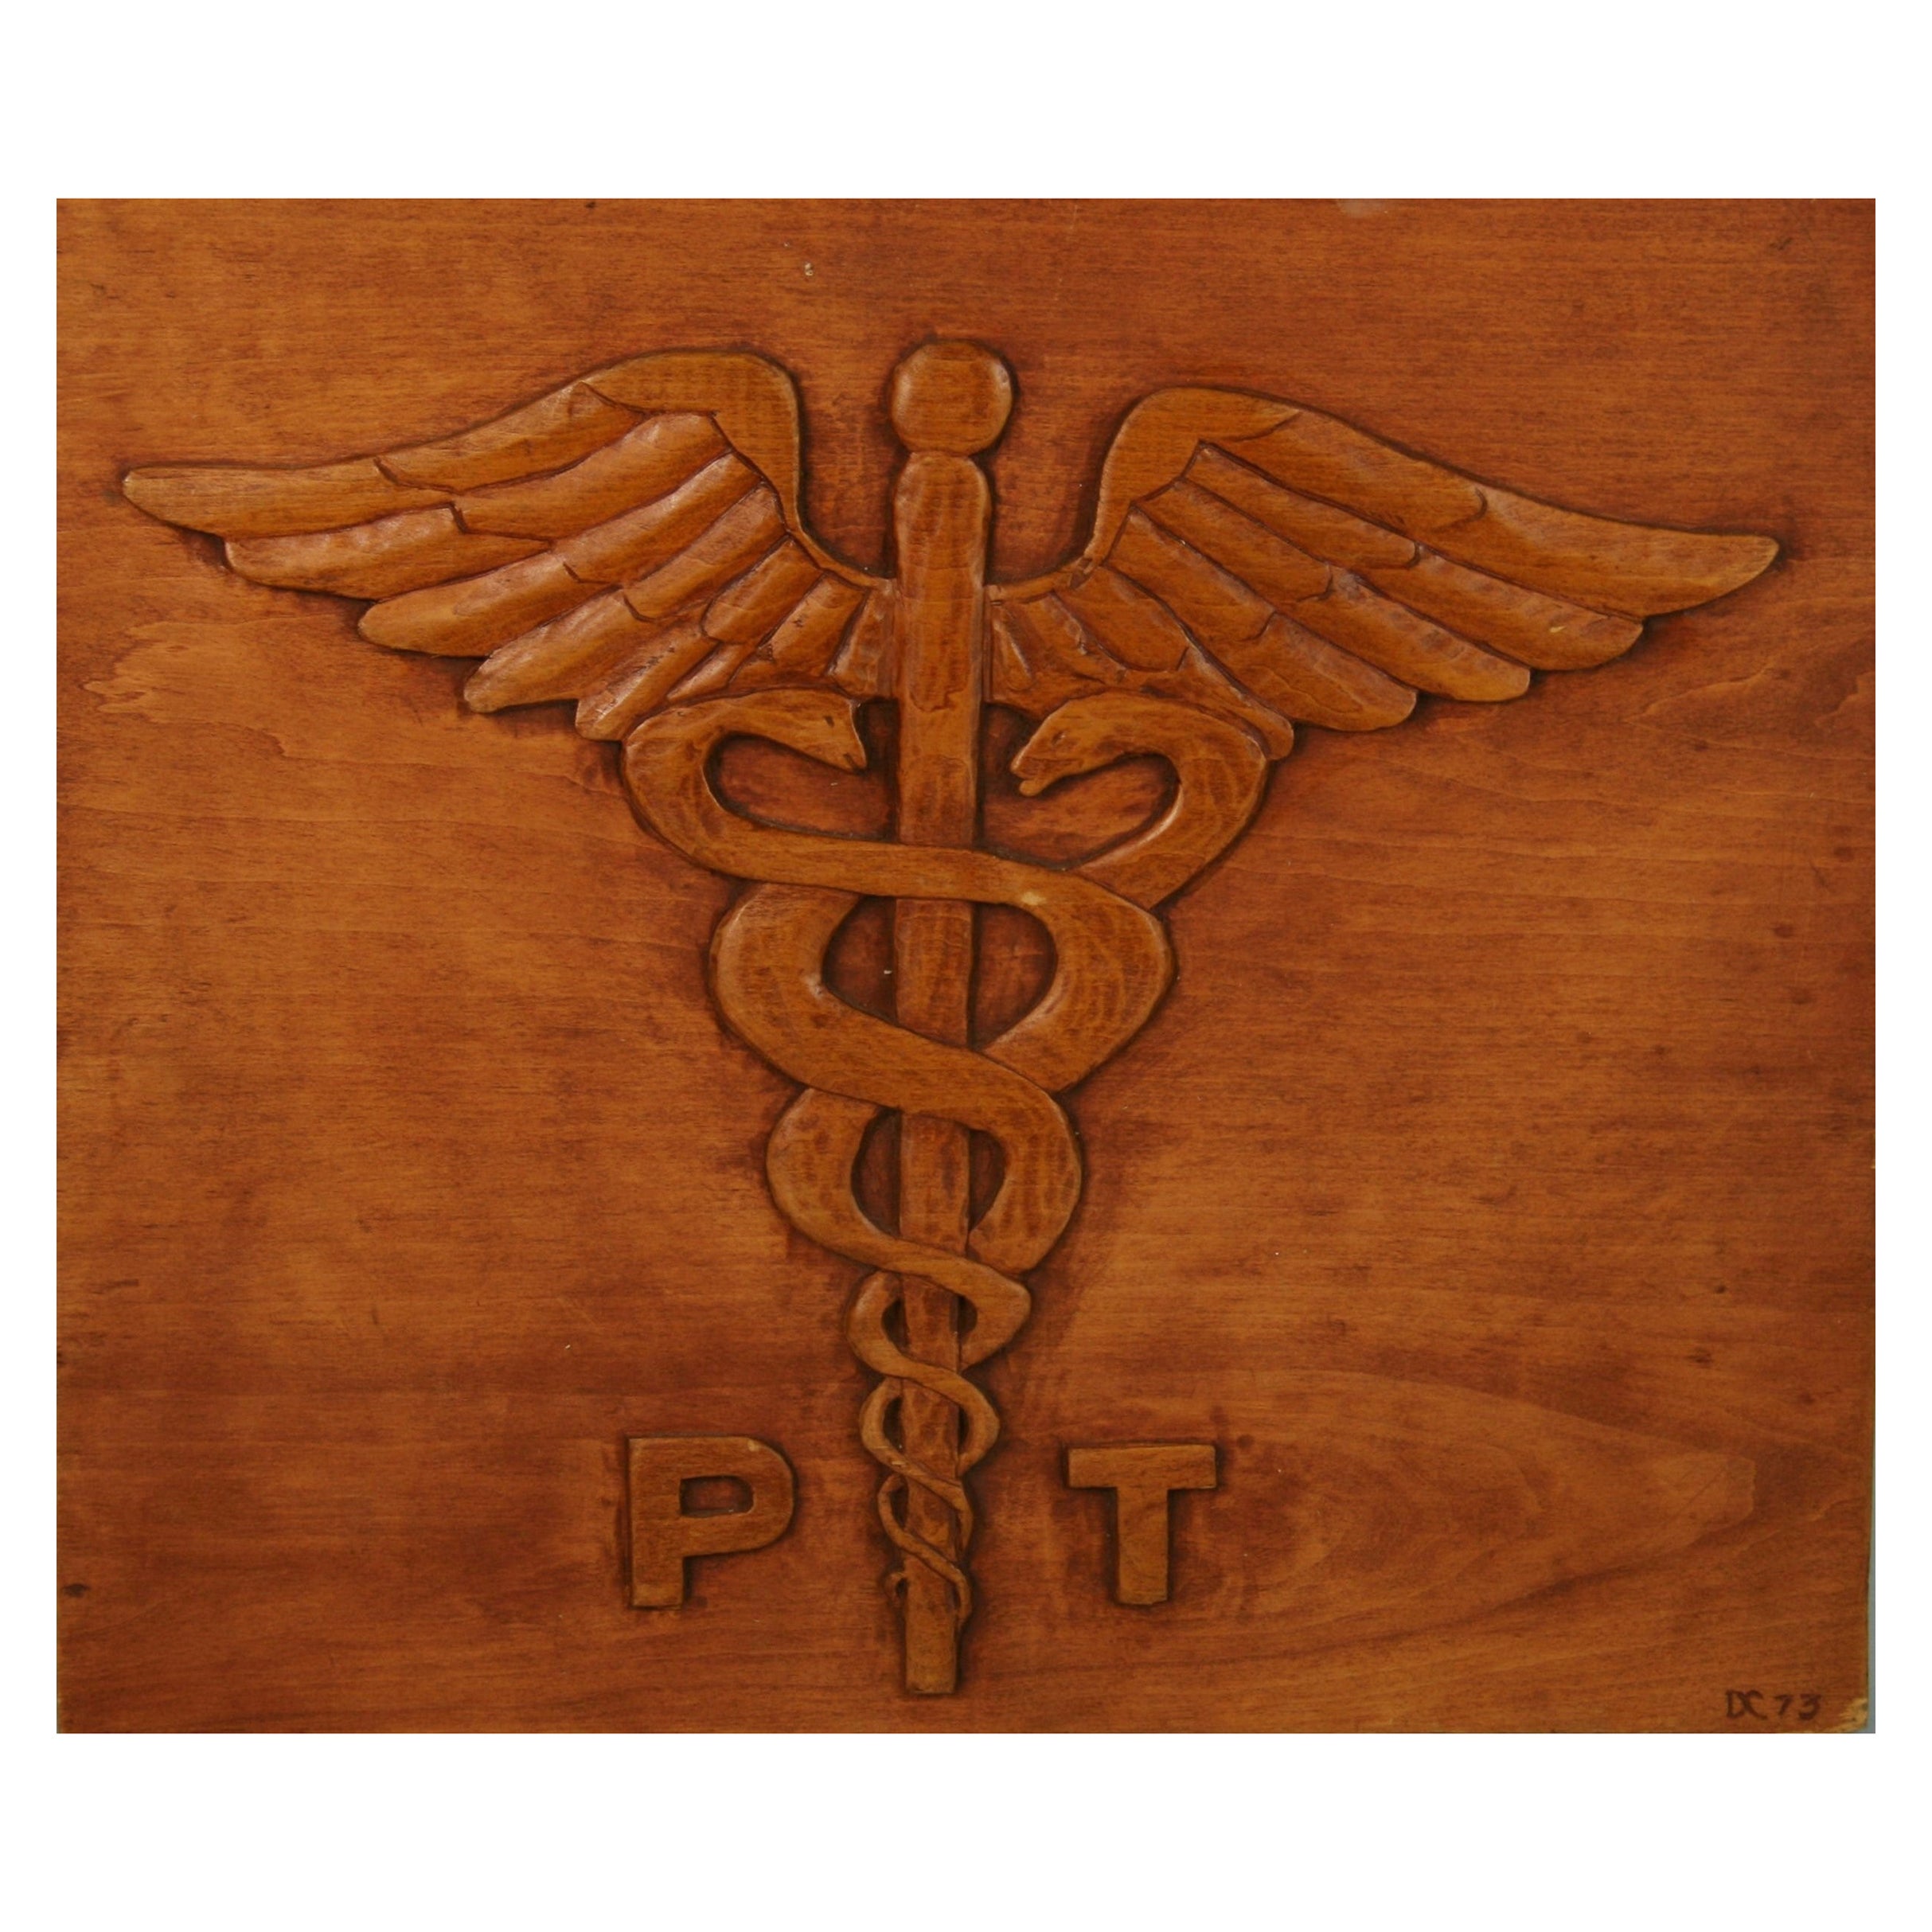 Carved Wood Wall Plaque Medical Symbol